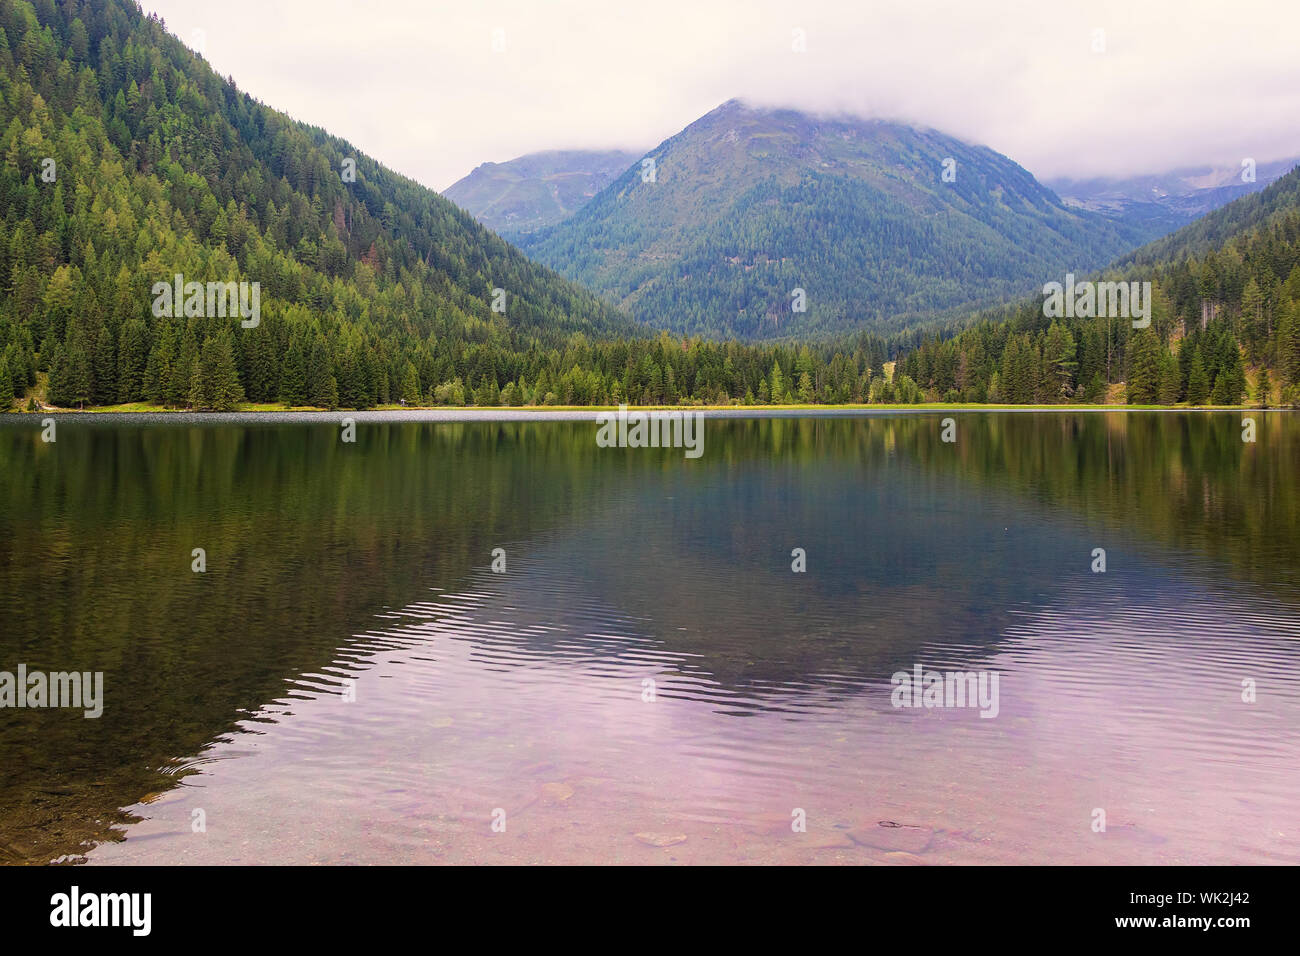 Austria Alps landscape panorama with mountain lake in morning fog with beautiful reflection, Etrachsee in Niedere Tauern near Schladming Dachstein Stock Photo